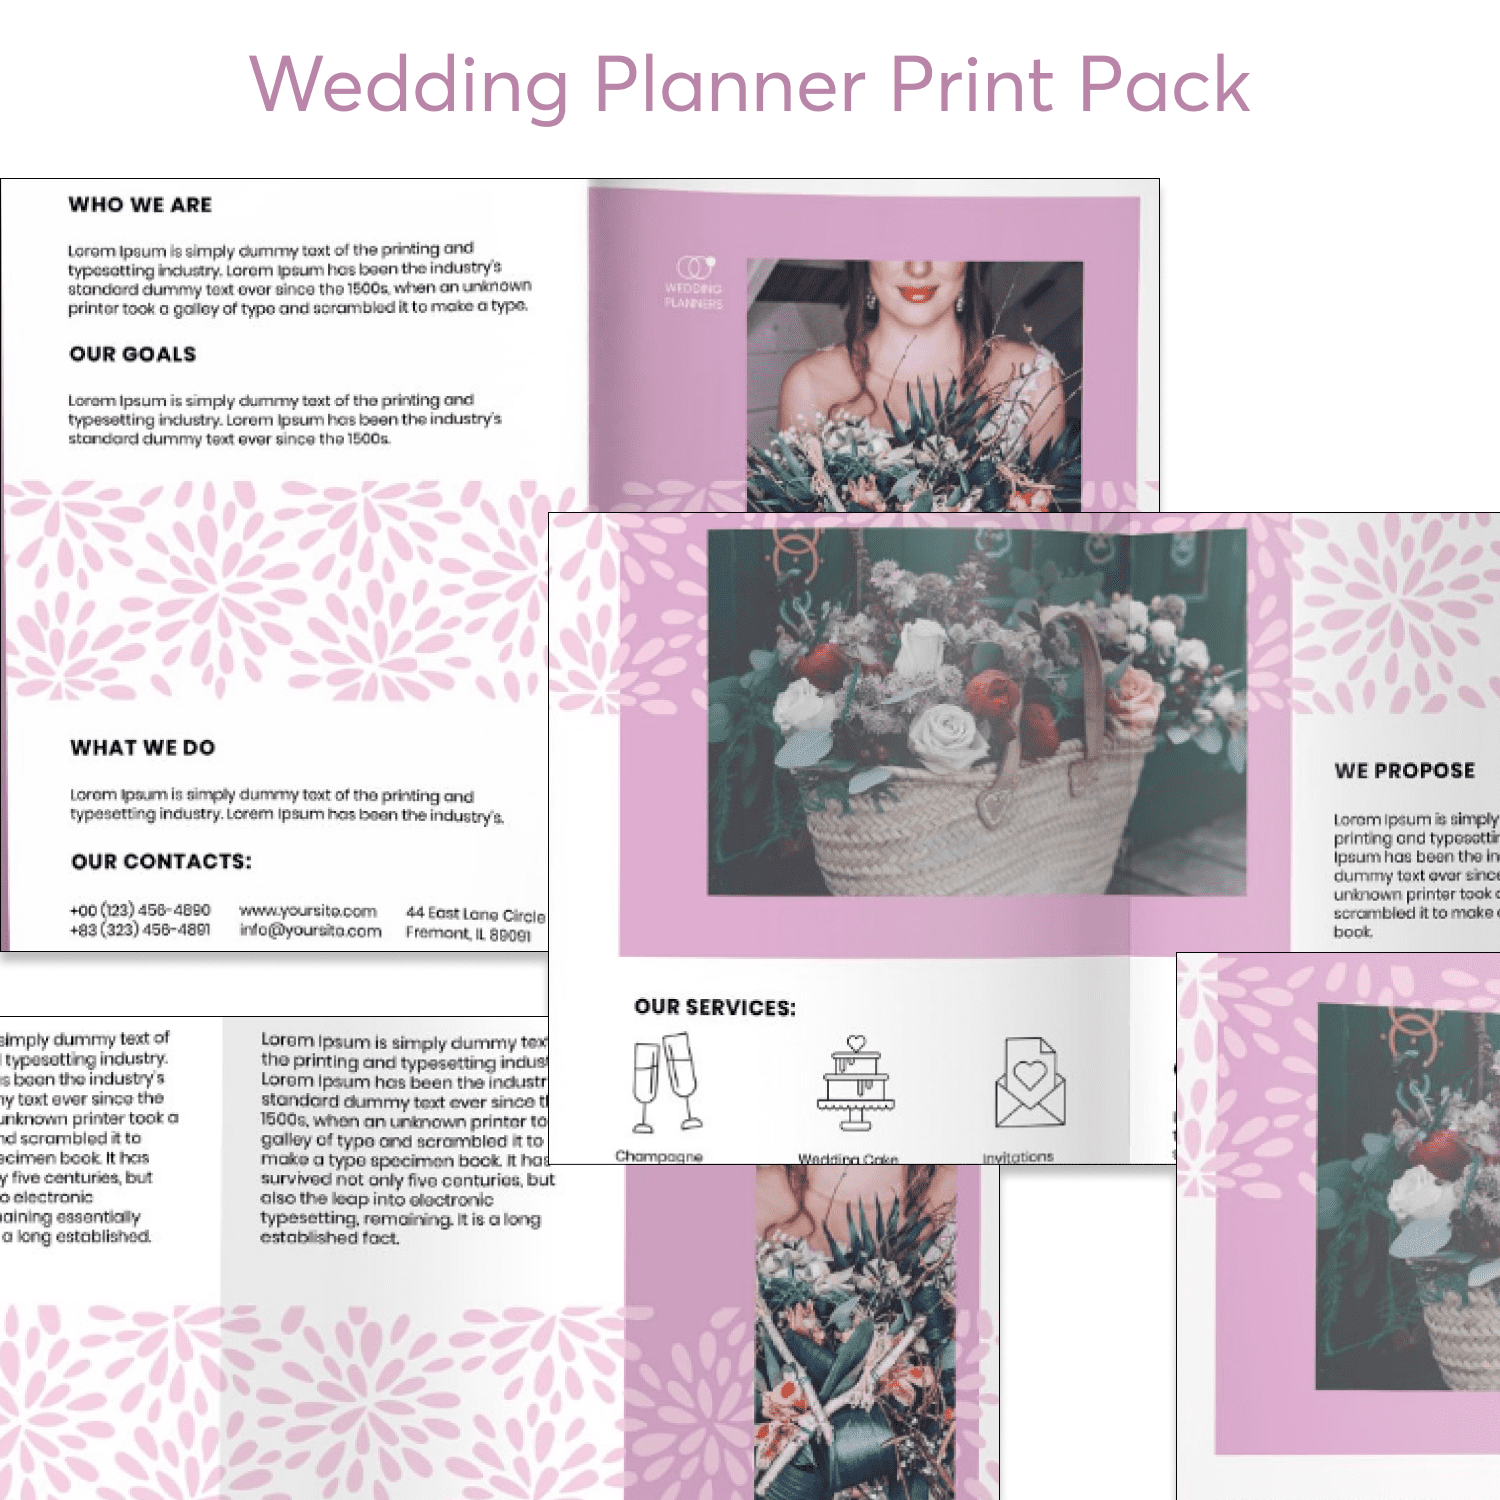 Wedding Planner Print Pack cover.